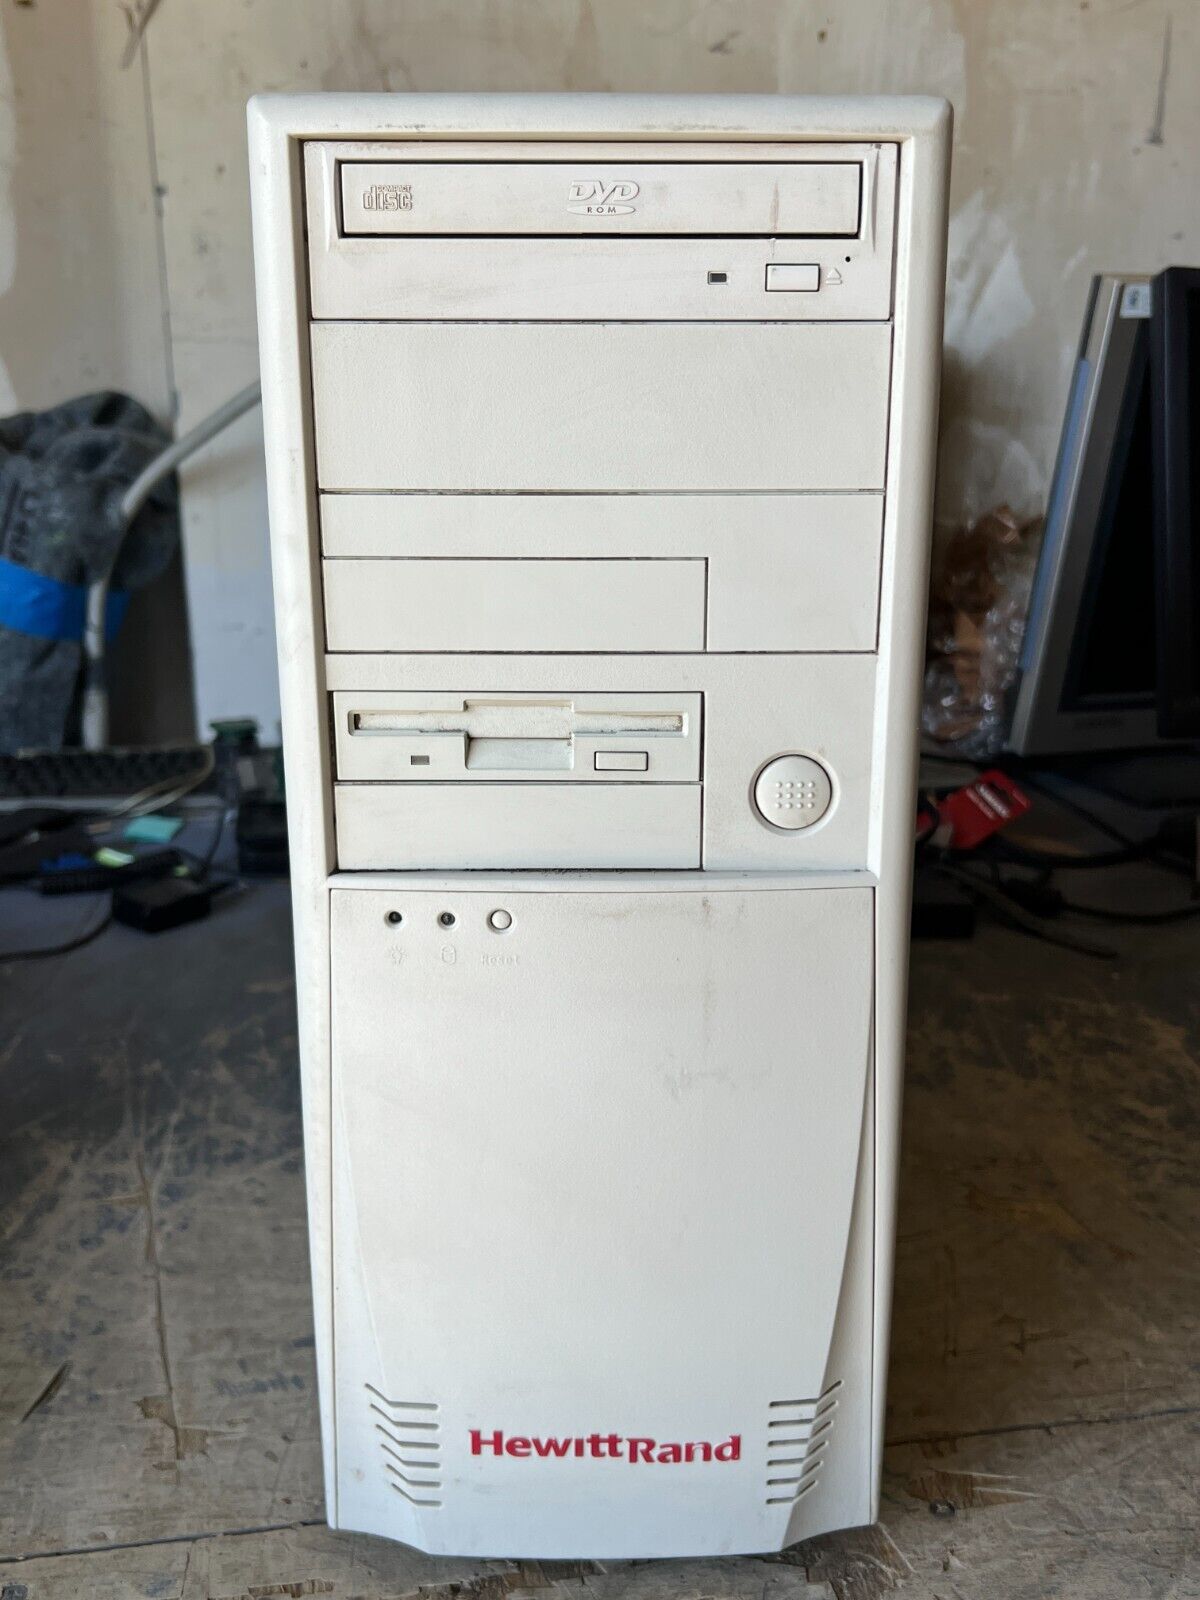 Hewitt Rand Vintage PC, 80GB HDD, Video Issue